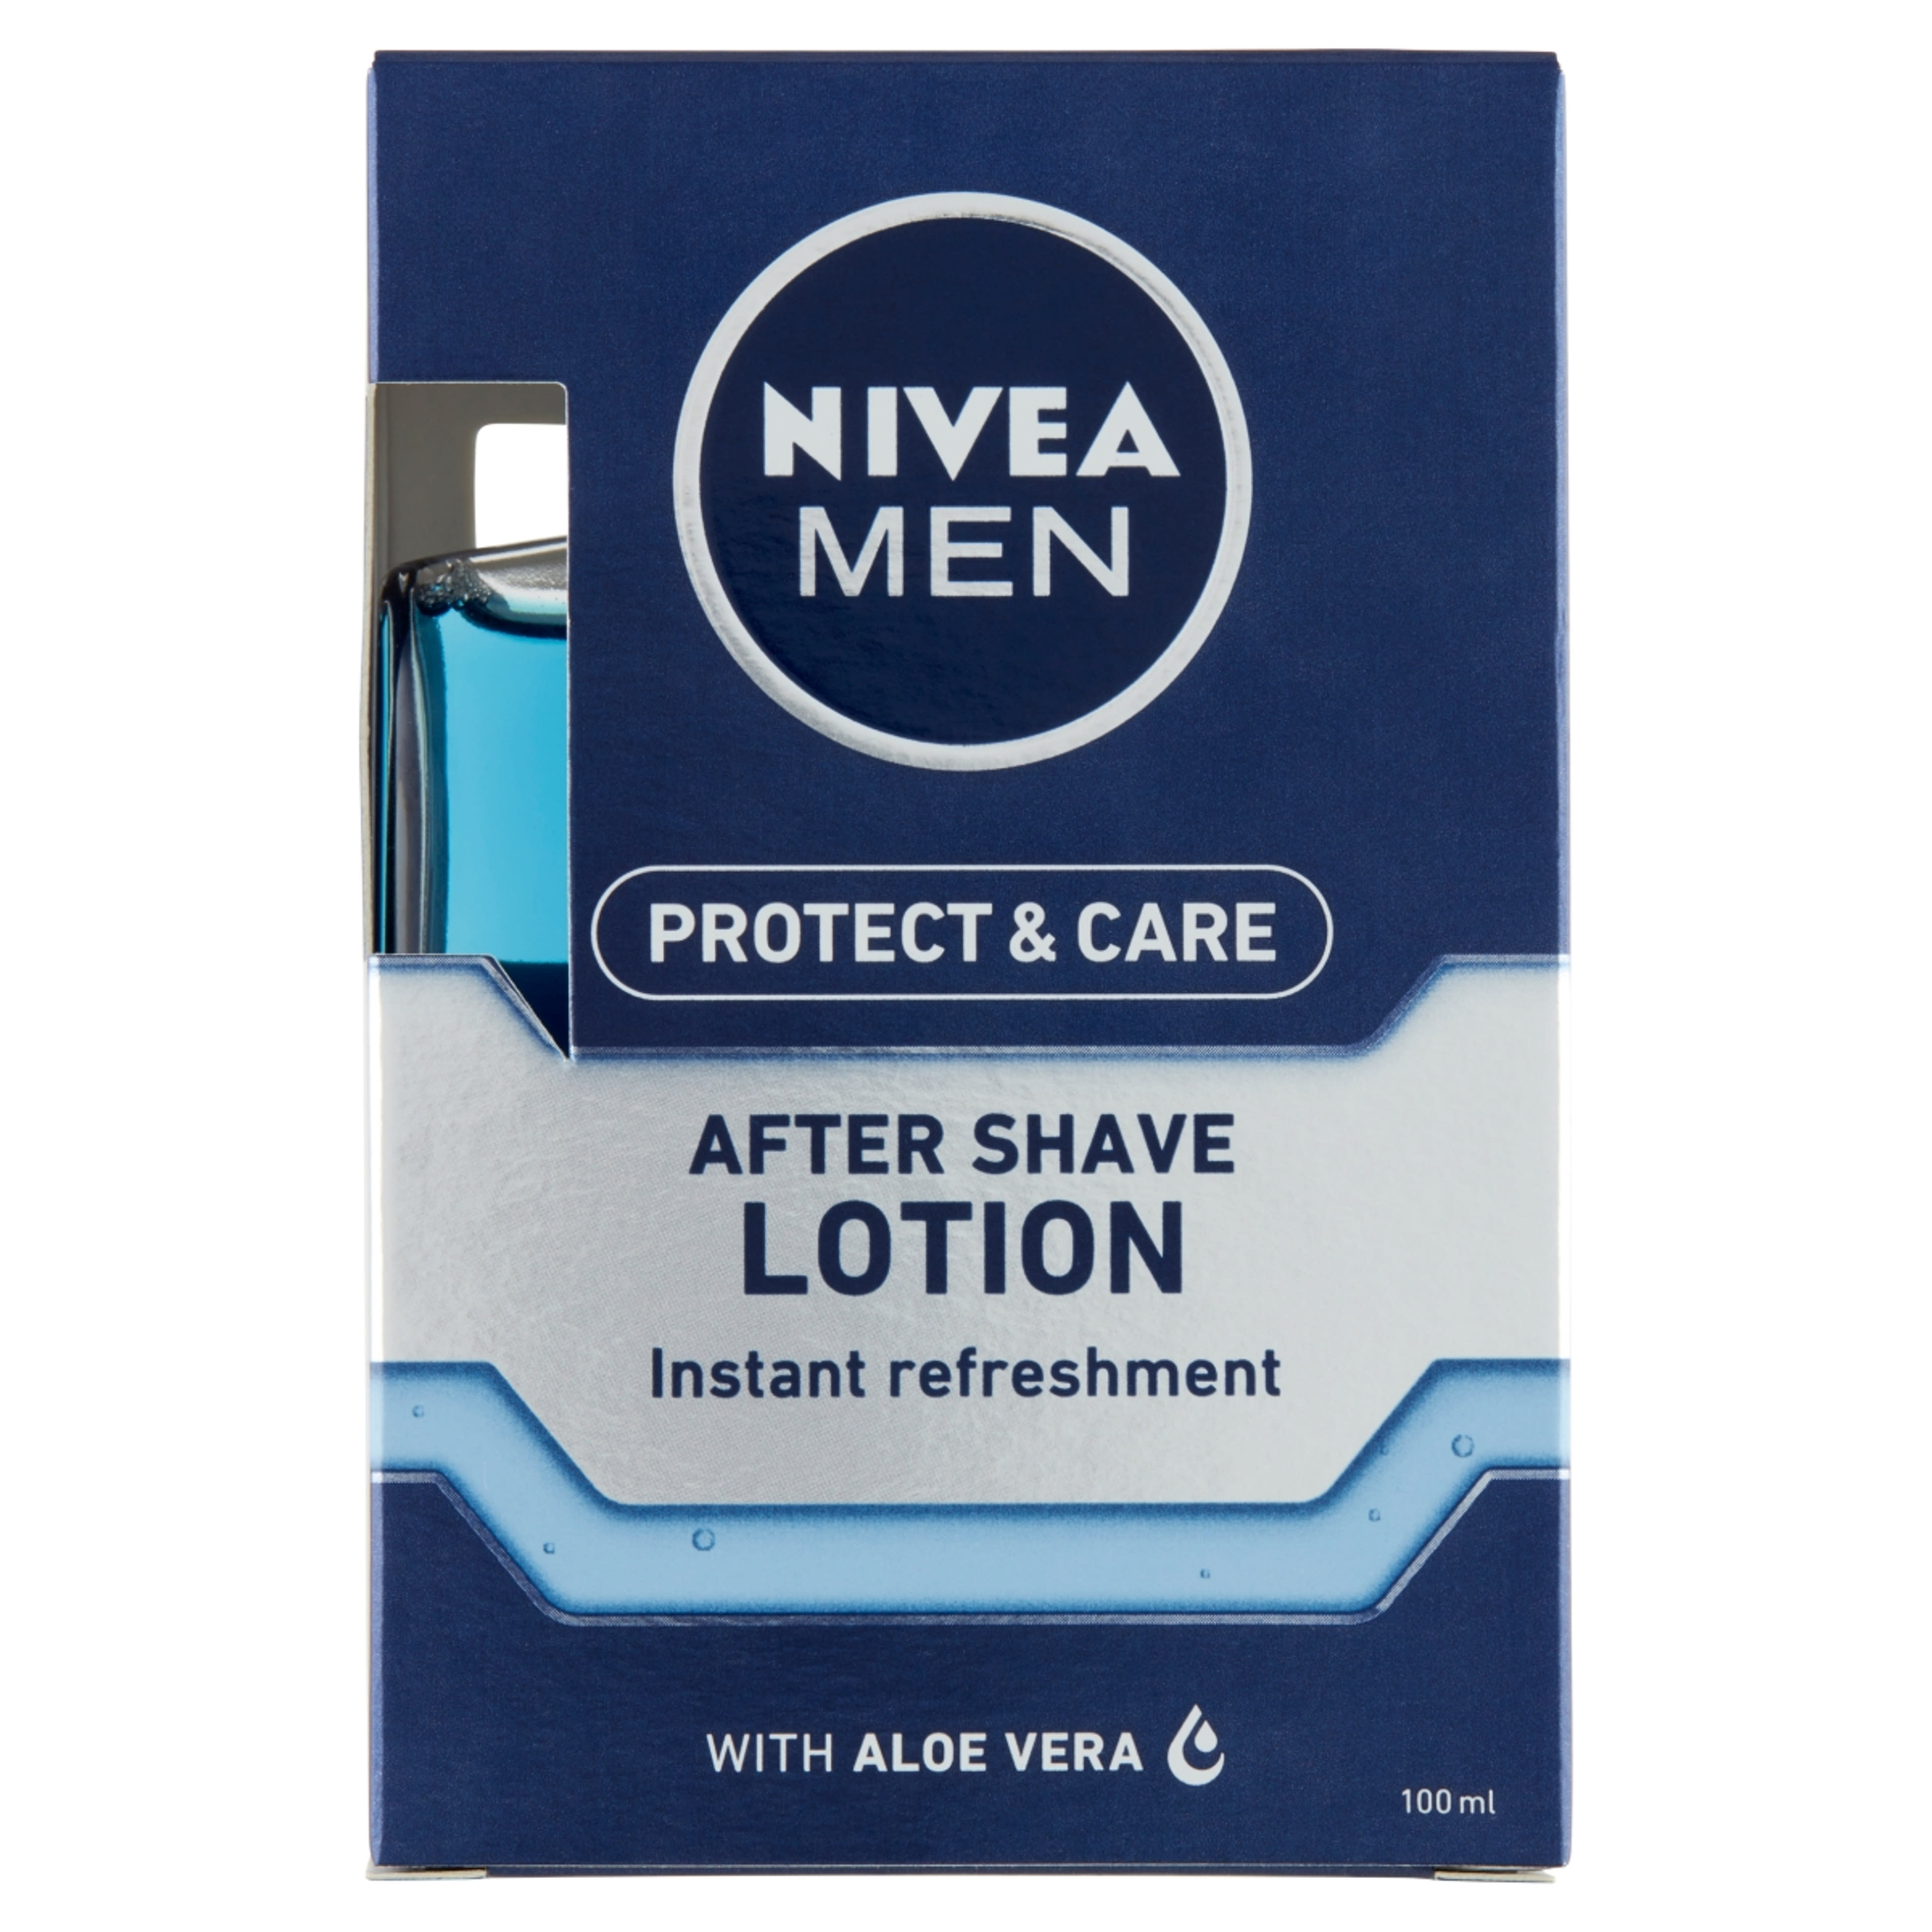 Nivea Men Protect & Care After Shave Lotion - 100 ml